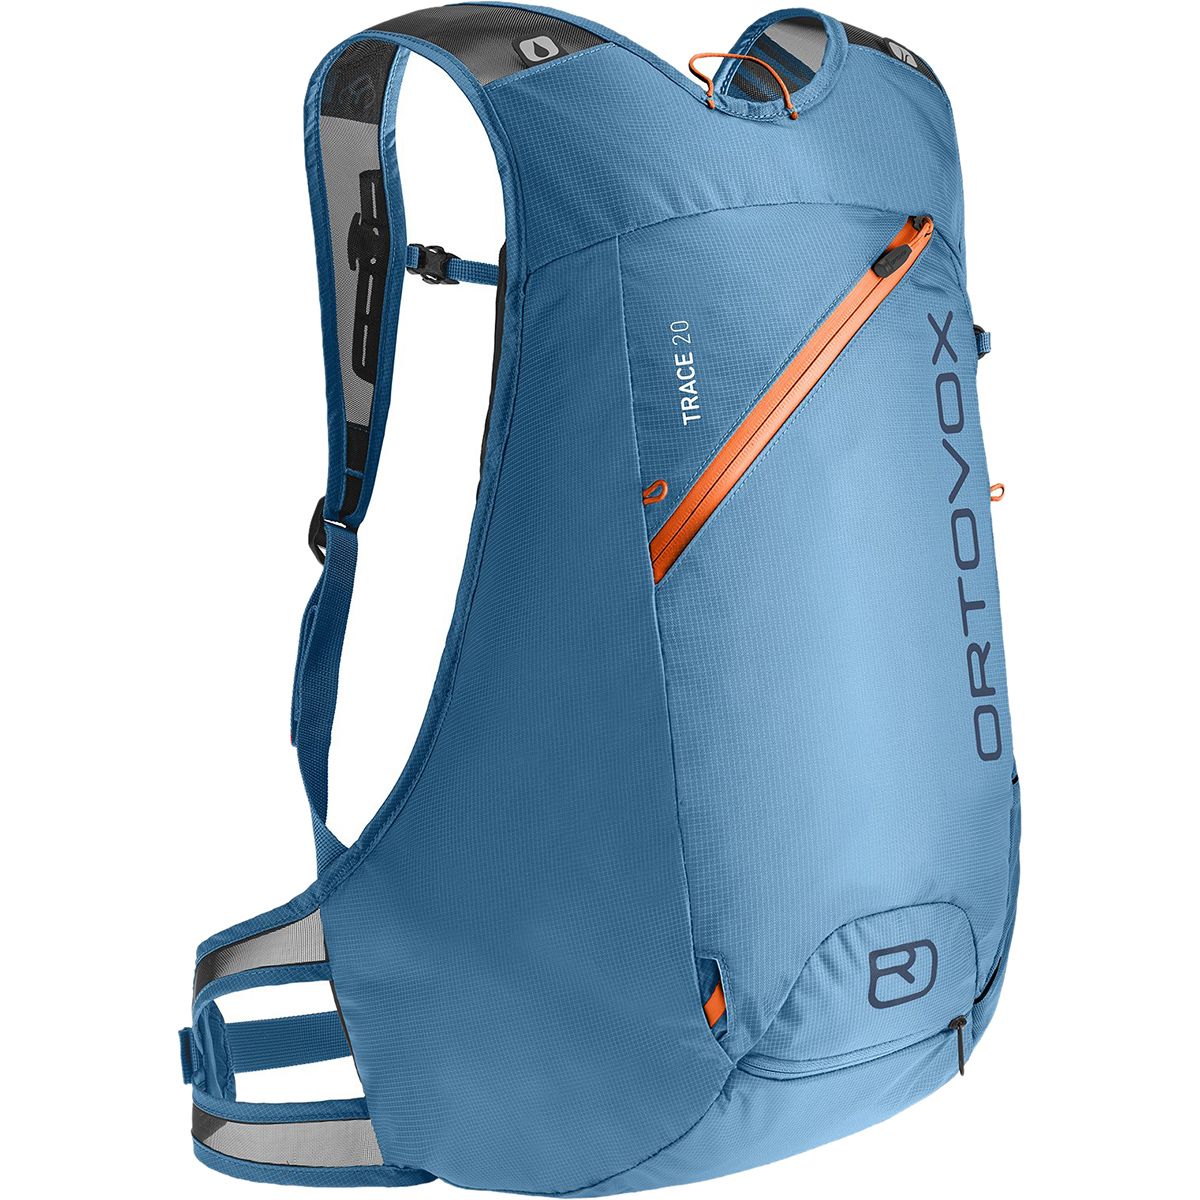 Billy eeuwig Direct Ortovox Trace 20L Backpack - Hike & Camp